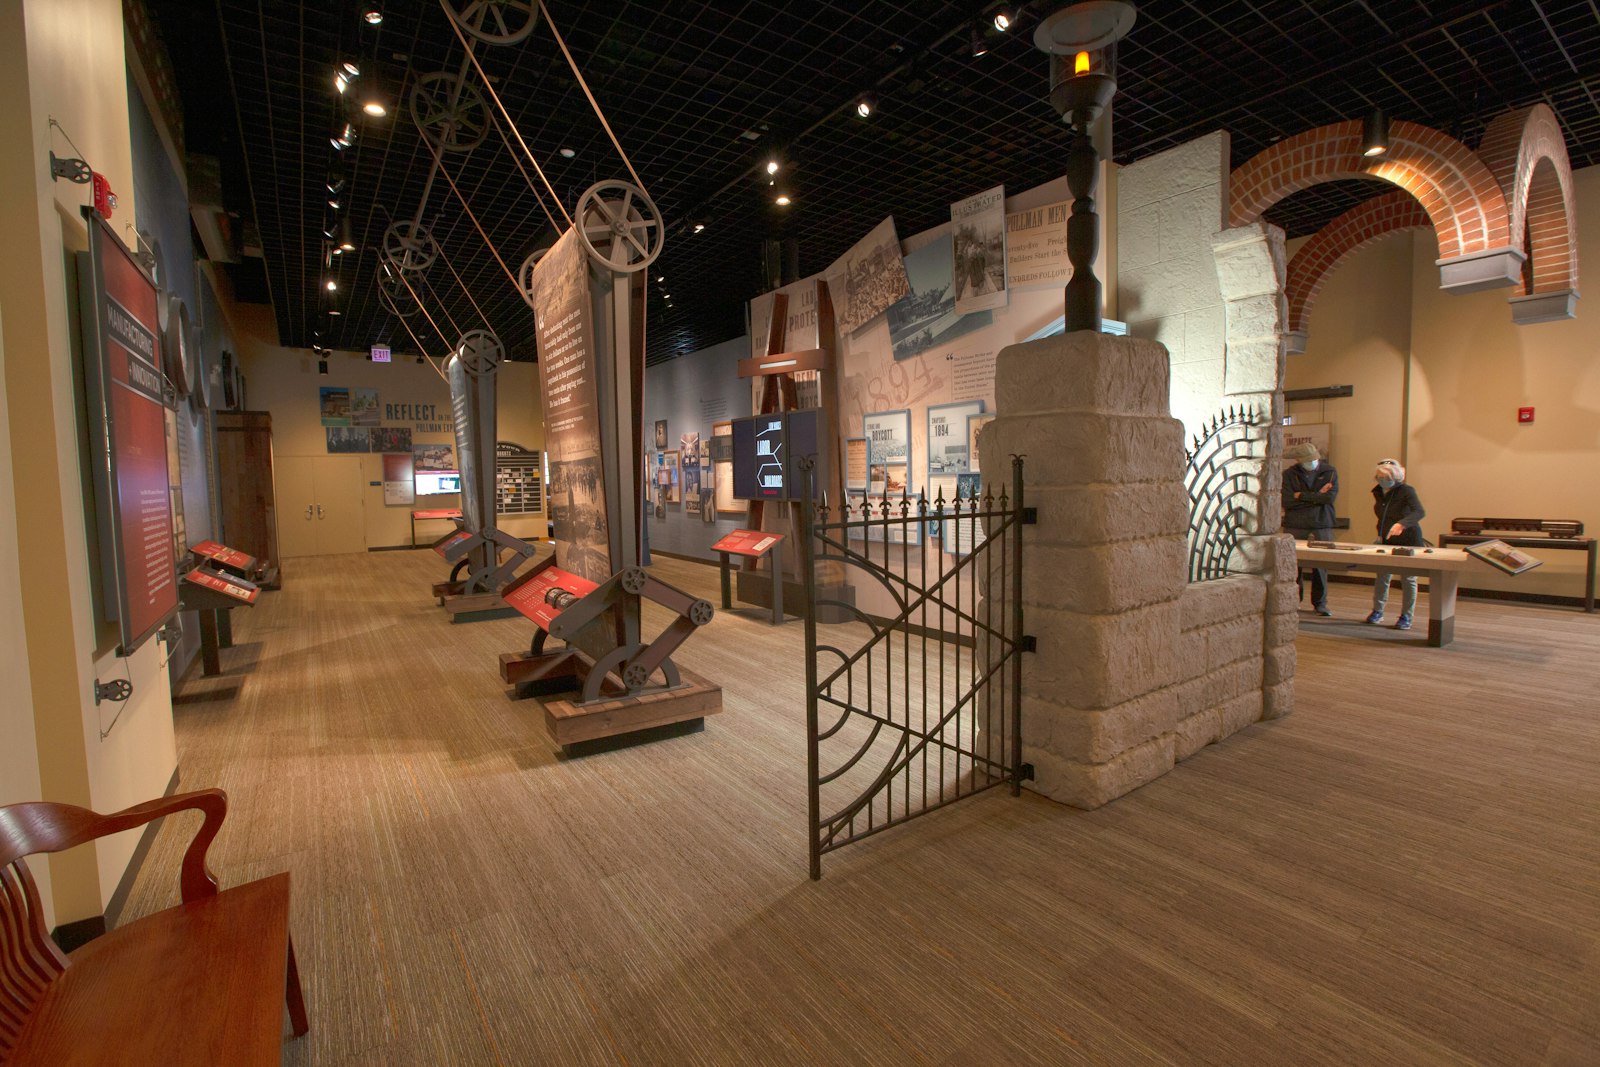 Various exhibits inside a historic red brick building